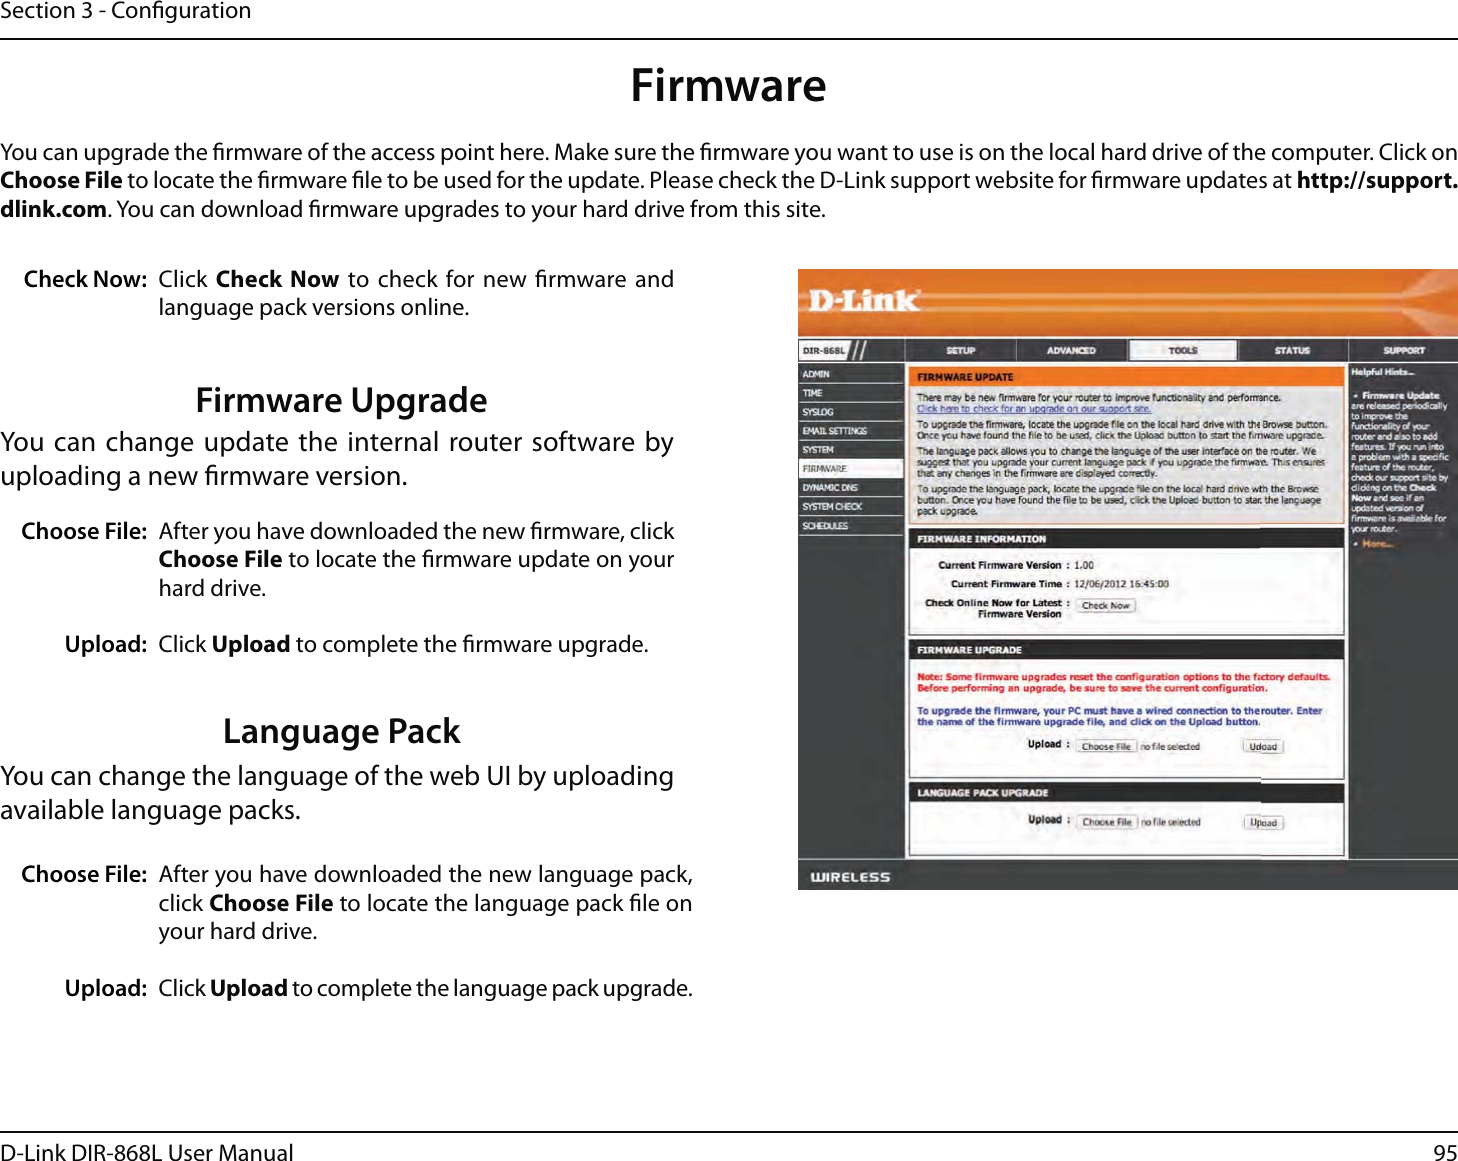 95D-Link DIR-868L User ManualSection 3 - CongurationFirmwareChoose File:Upload:After you have downloaded the new rmware, click Choose File to locate the rmware update on your hard drive.Click Upload to complete the rmware upgrade.You can upgrade the rmware of the access point here. Make sure the rmware you want to use is on the local hard drive of the computer. Click on Choose File to locate the rmware le to be used for the update. Please check the D-Link support website for rmware updates at http://support.dlink.com. You can download rmware upgrades to your hard drive from this site.After you have downloaded the new language pack, click Choose File to locate the language pack le on your hard drive.Click Upload to complete the language pack upgrade.Language PackYou can change the language of the web UI by uploading available language packs.Choose File:Upload:Click Check Now to check for new rmware and language pack versions online.Check Now:Firmware UpgradeYou can change update the internal router software by uploading a new rmware version.